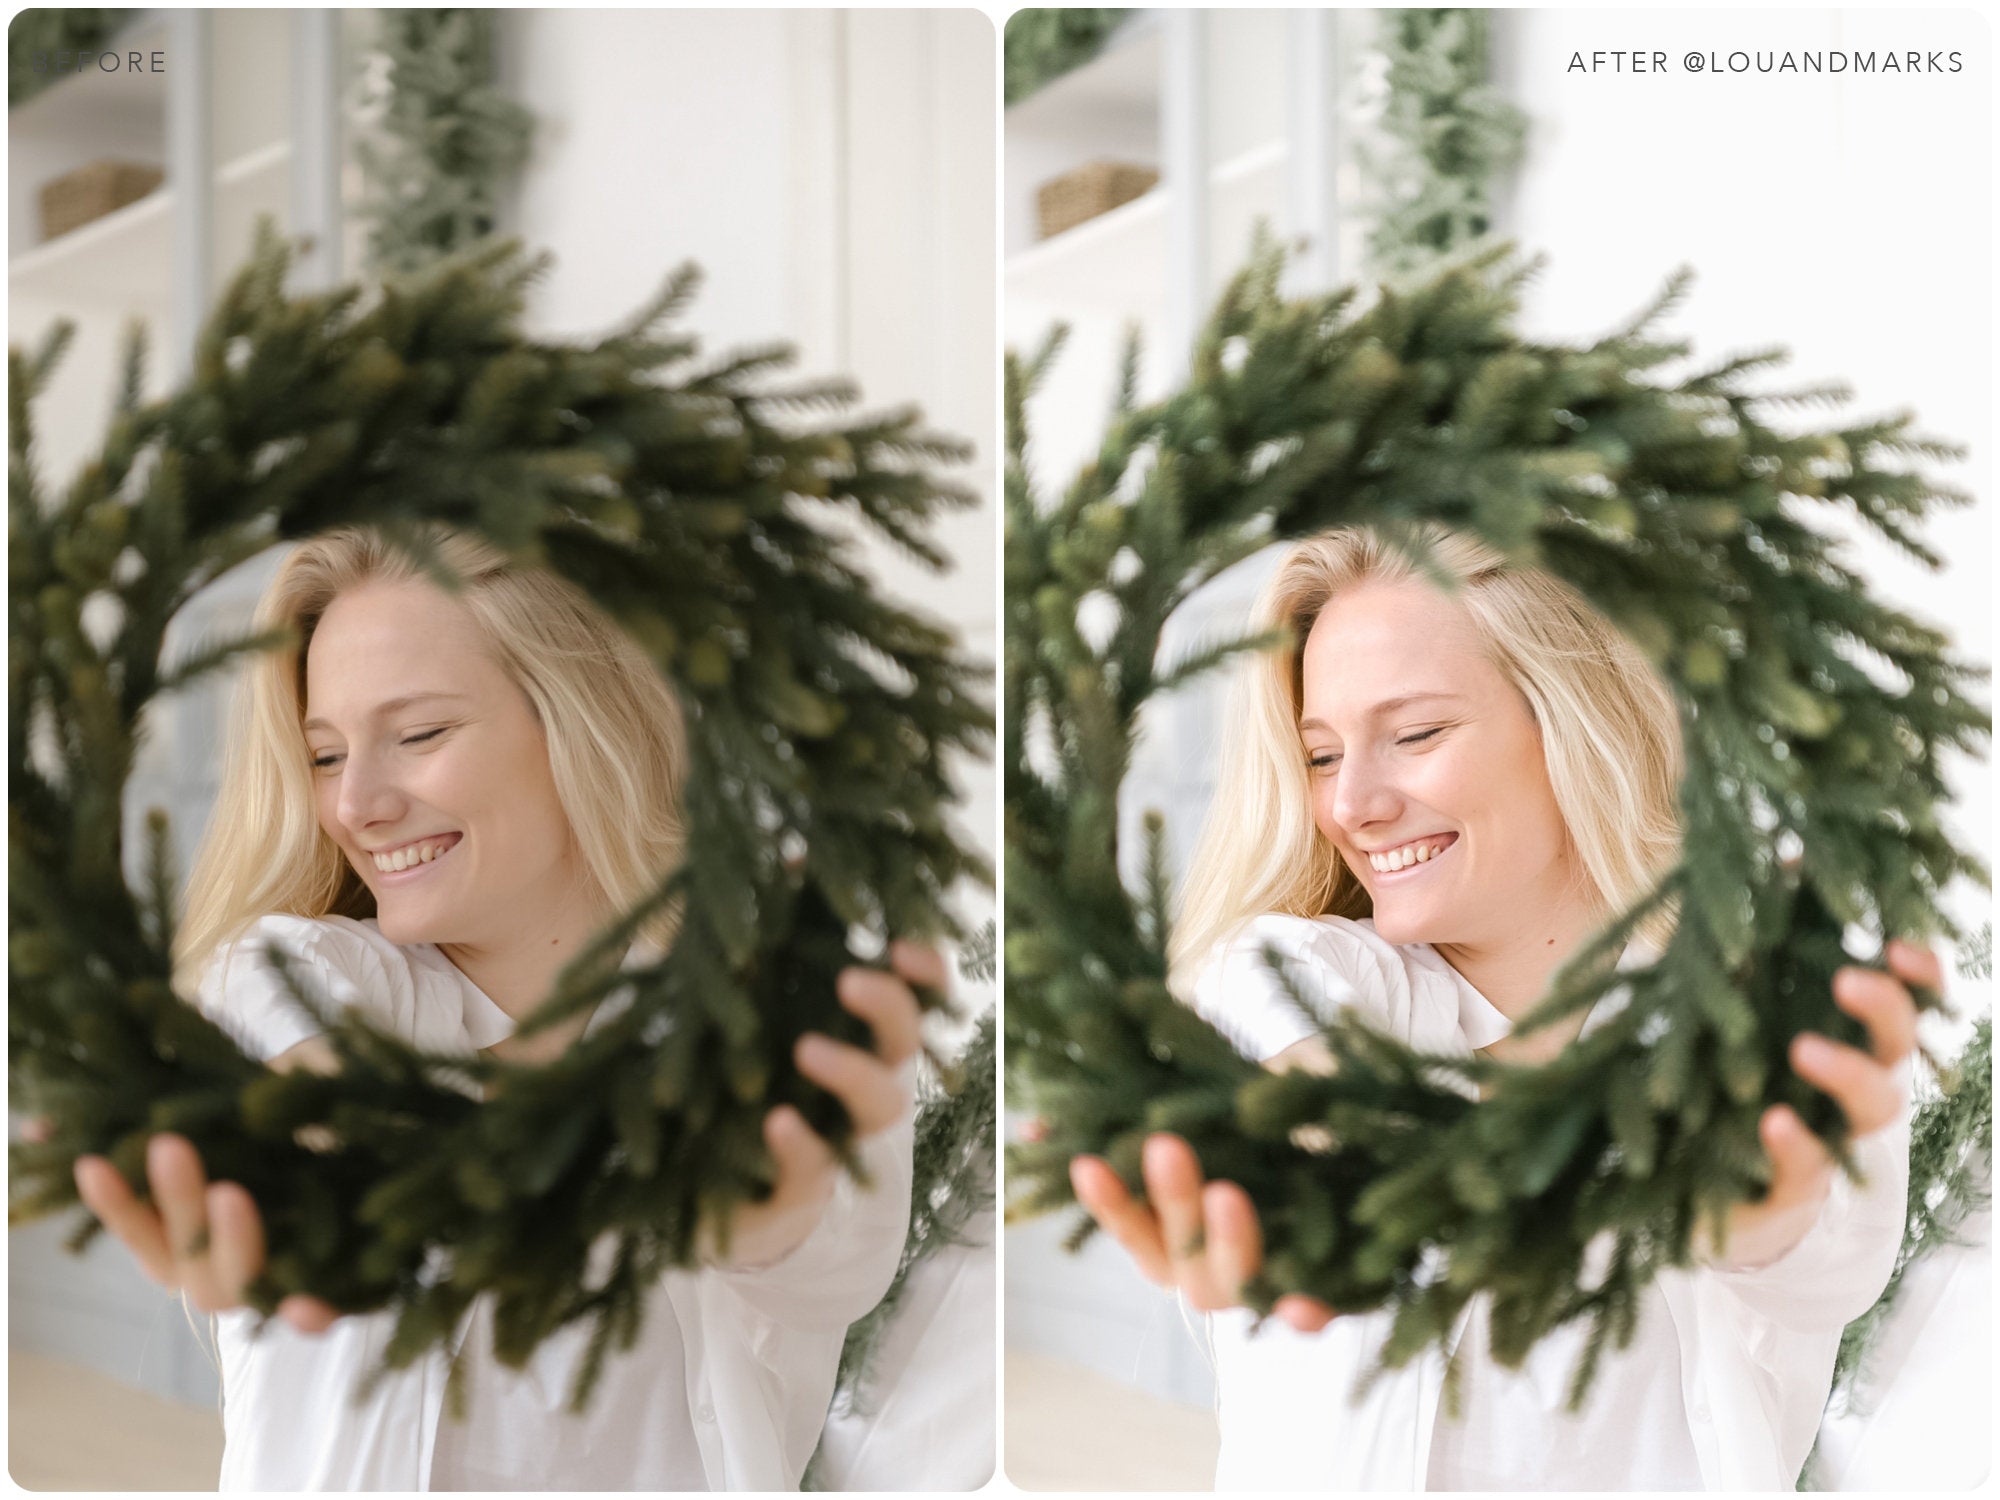 Bright & Merry Preset For Christmas